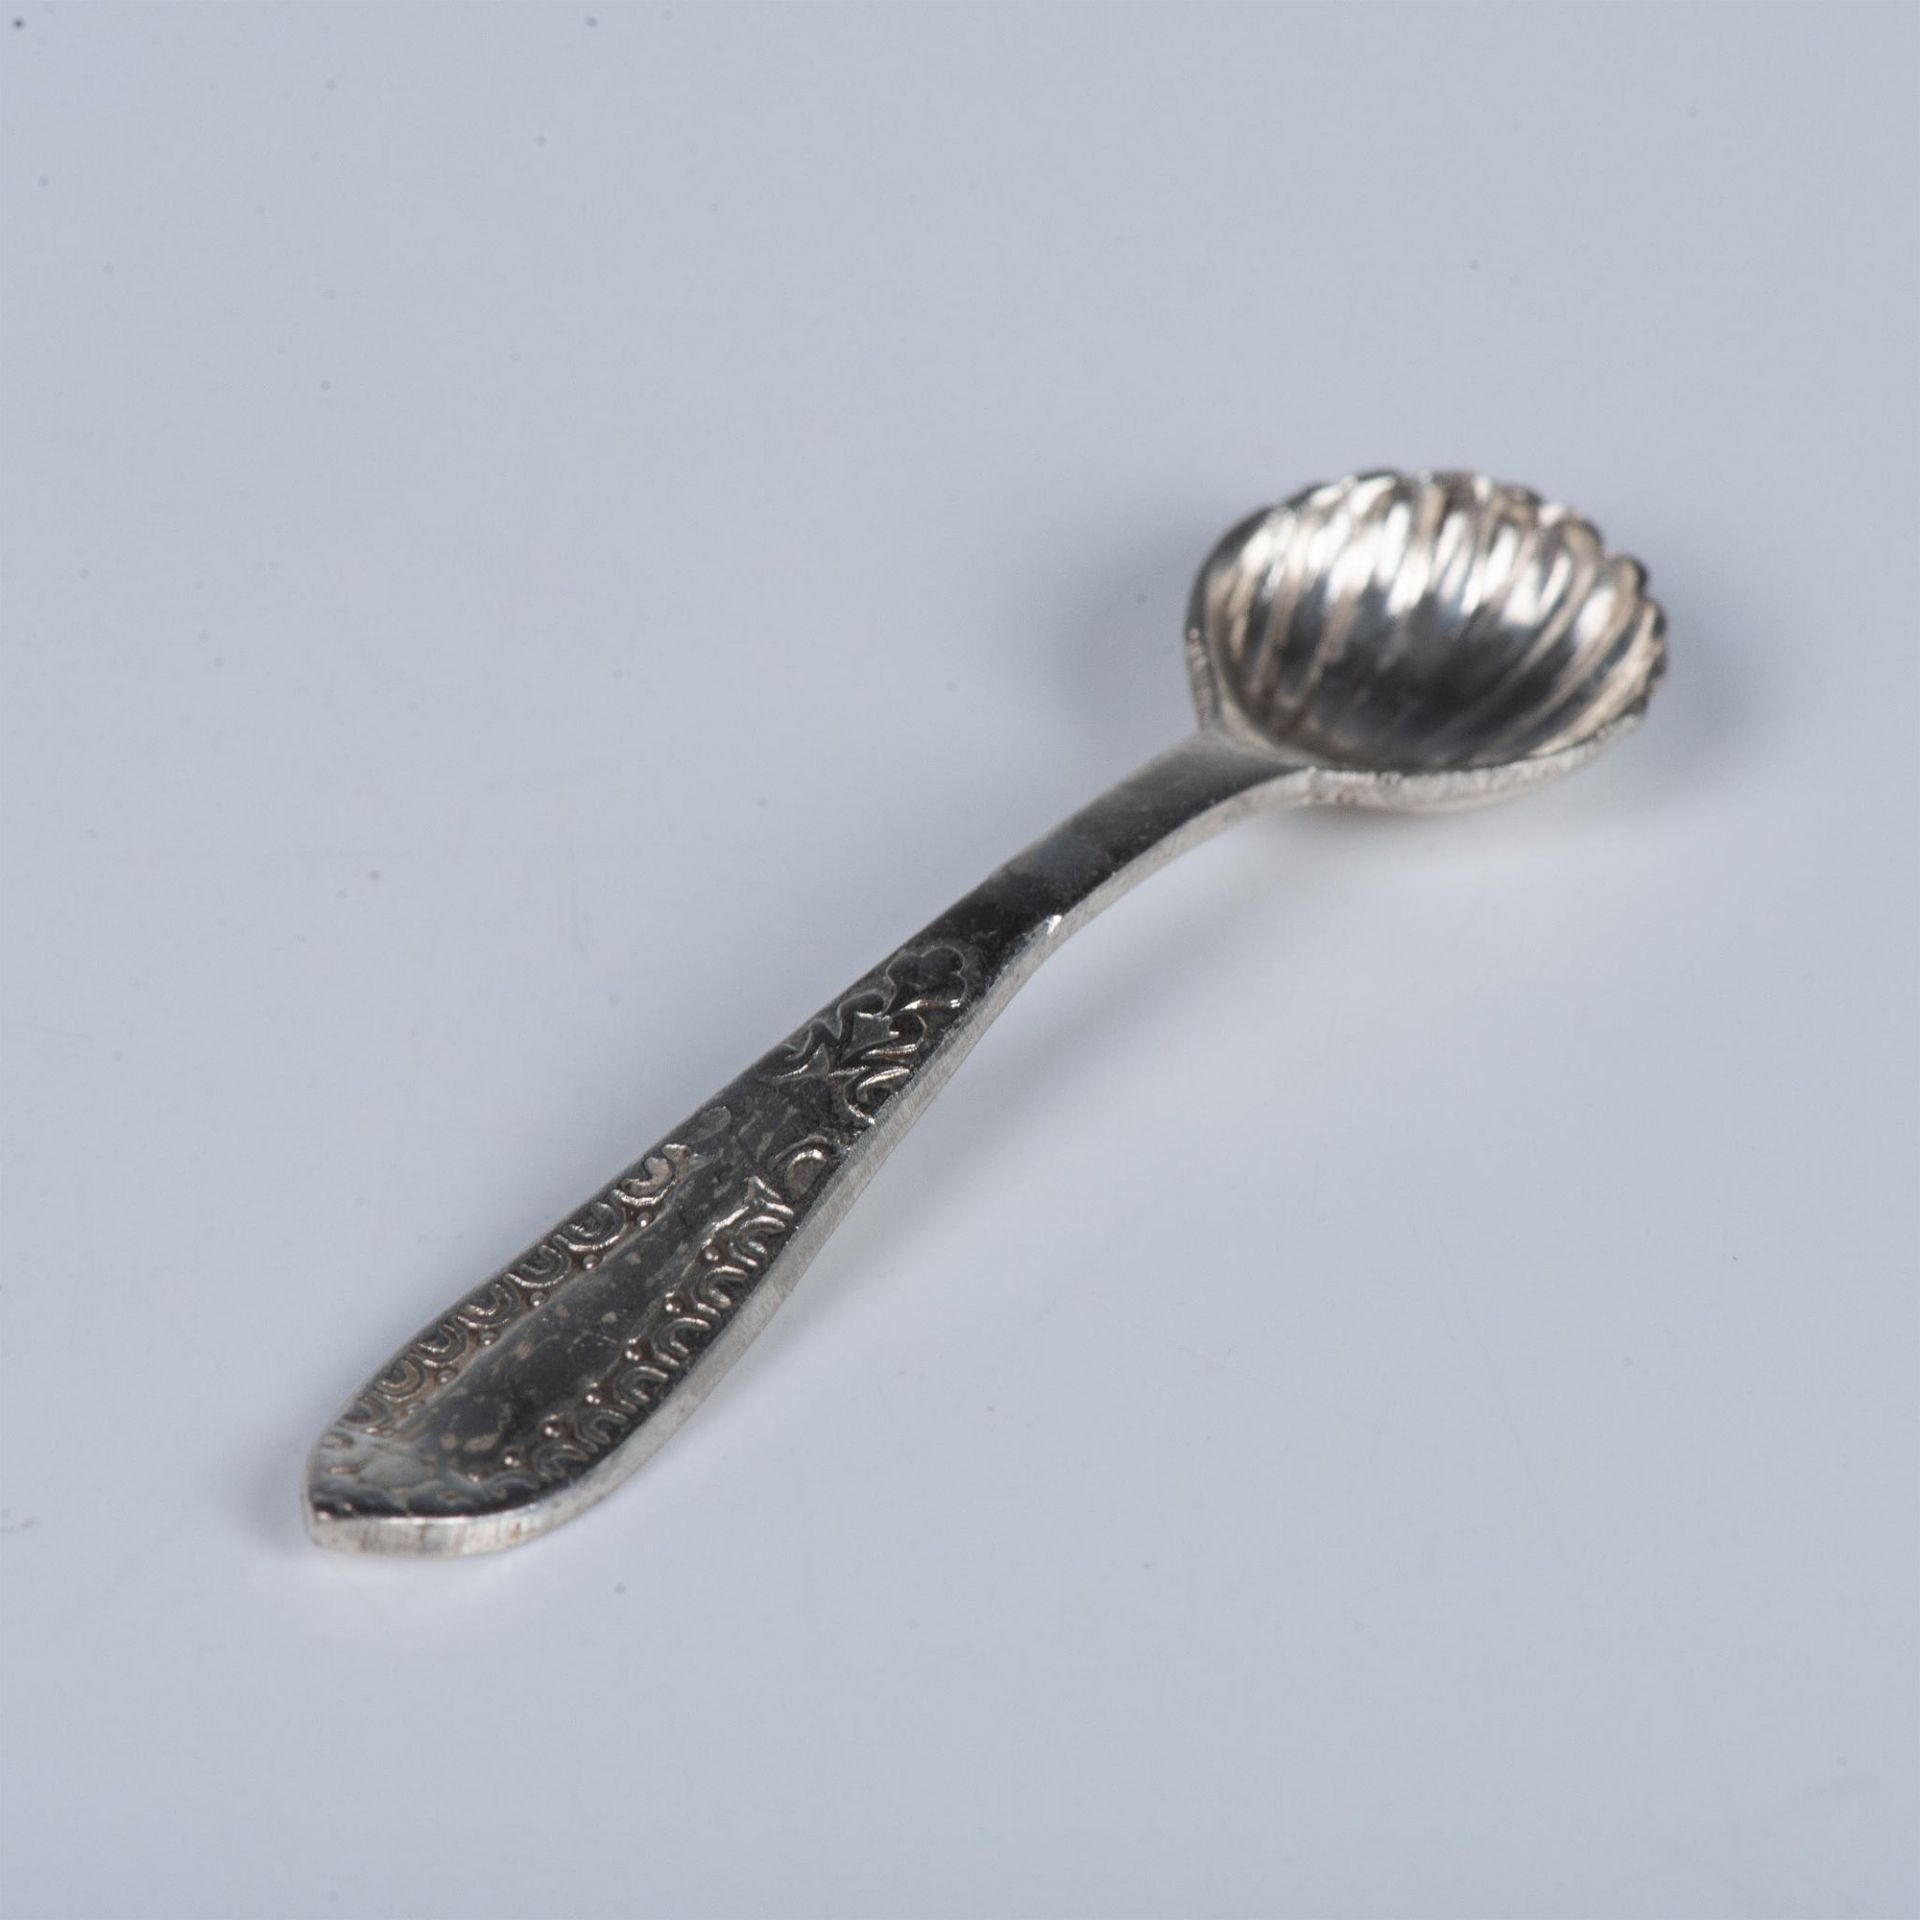 13pc Demitasse Spoons with Deity Heads and Shell Motif - Image 4 of 6